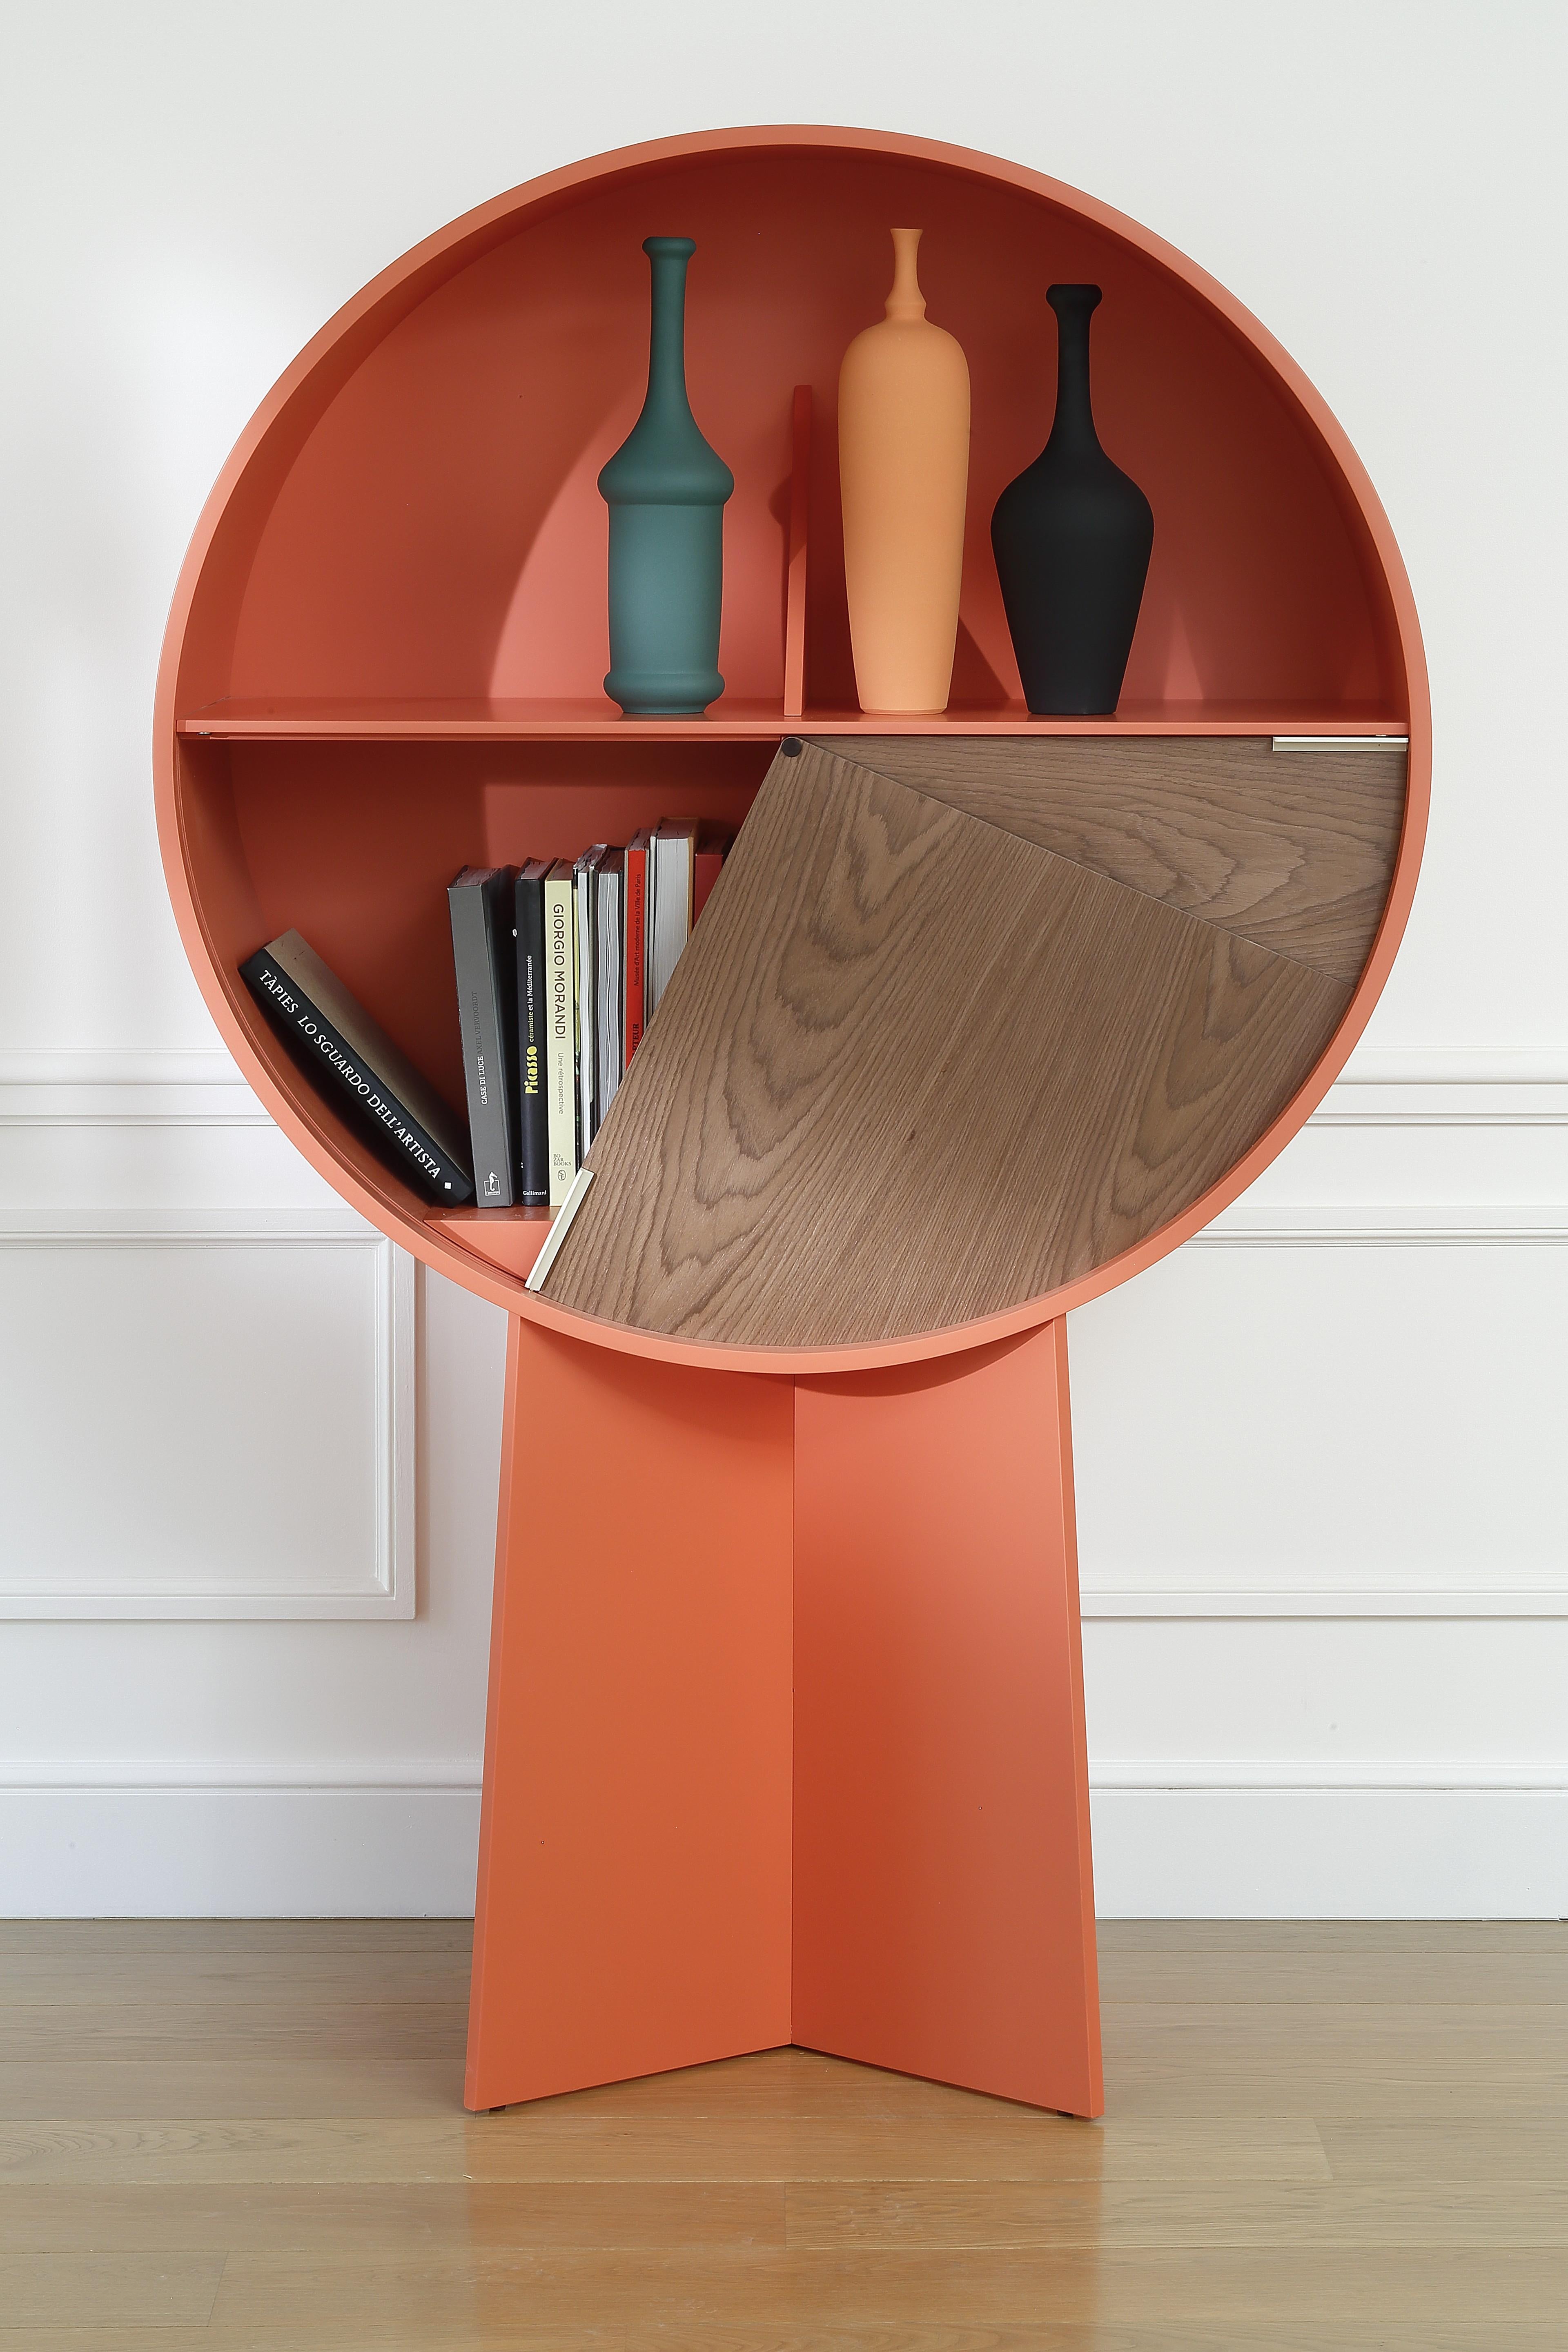 Orange luna storage cabinet by Patricia Urquiola
Materials: Walnut veneer on medium, or orange lacquer on medium. 2 sliding doors in two-tone lacquered hemispheres or in varnished walnut veneer
Technique: Lacquered or natural wood. 
Dimensions: D